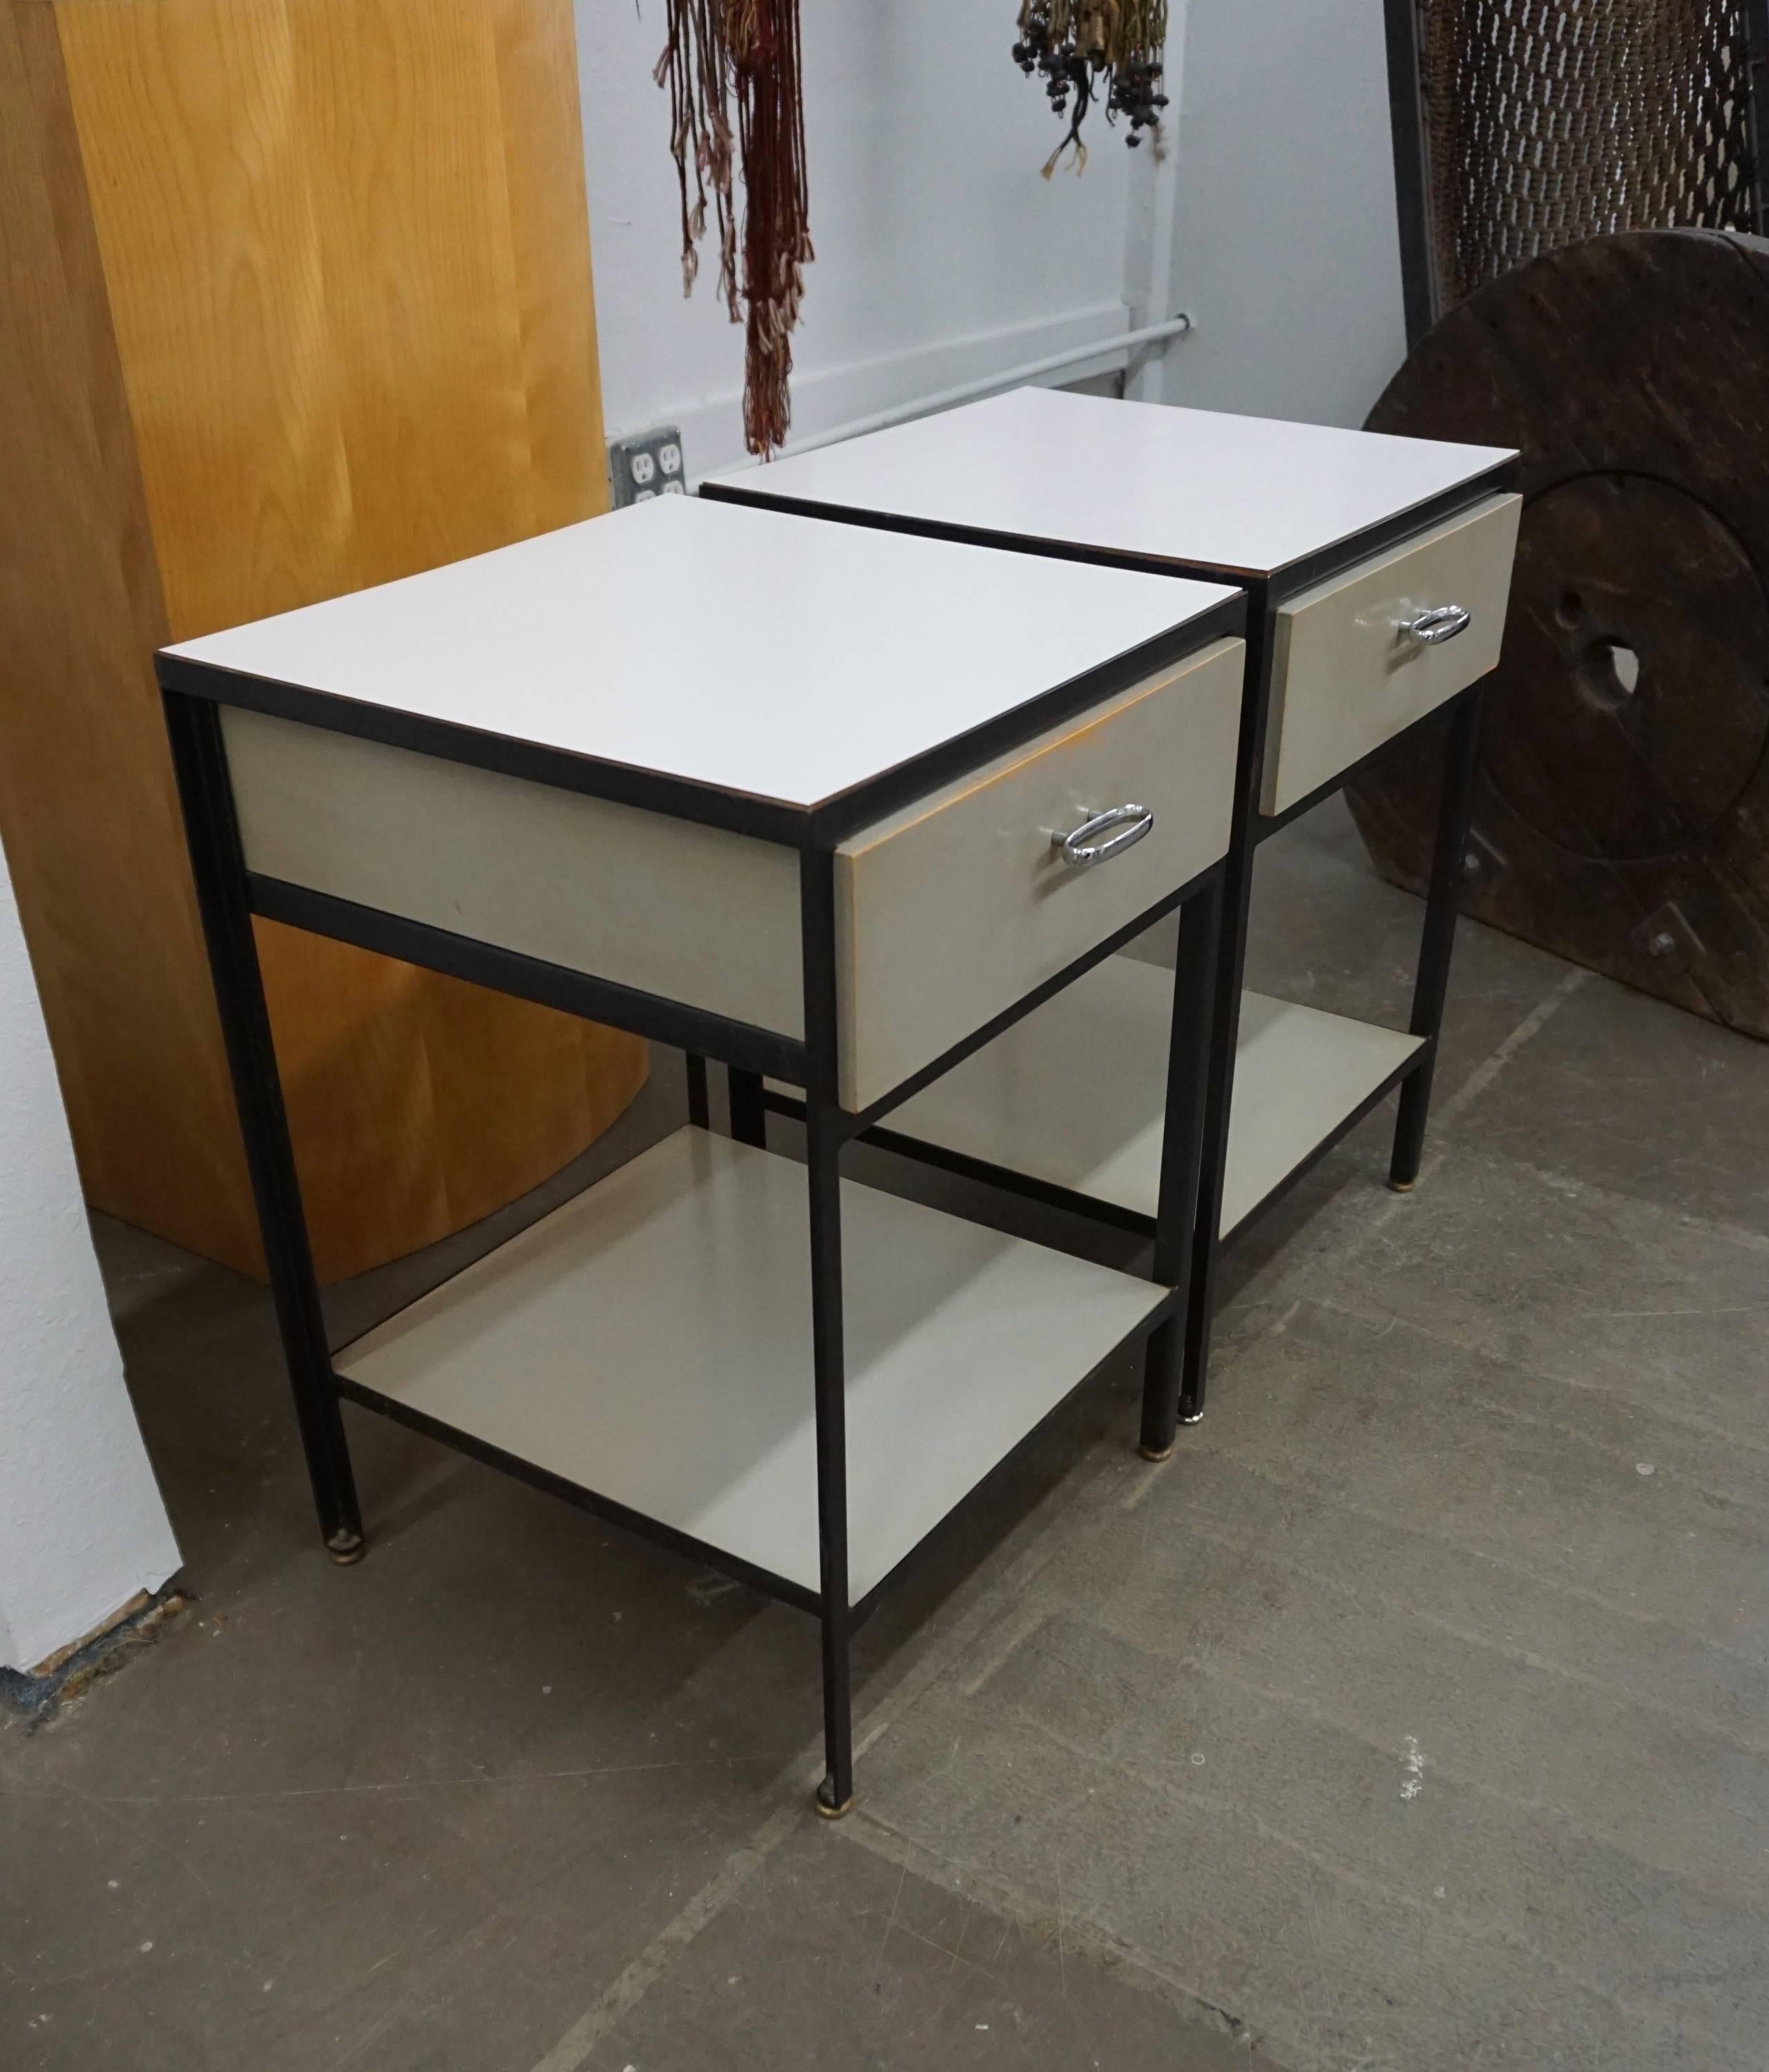 Practical design by Nelson for Herman Miller. Exposed black frame with gray drawer and white laminate top and undercarriage. Gently used condition with some paint loss to tops of drawers.